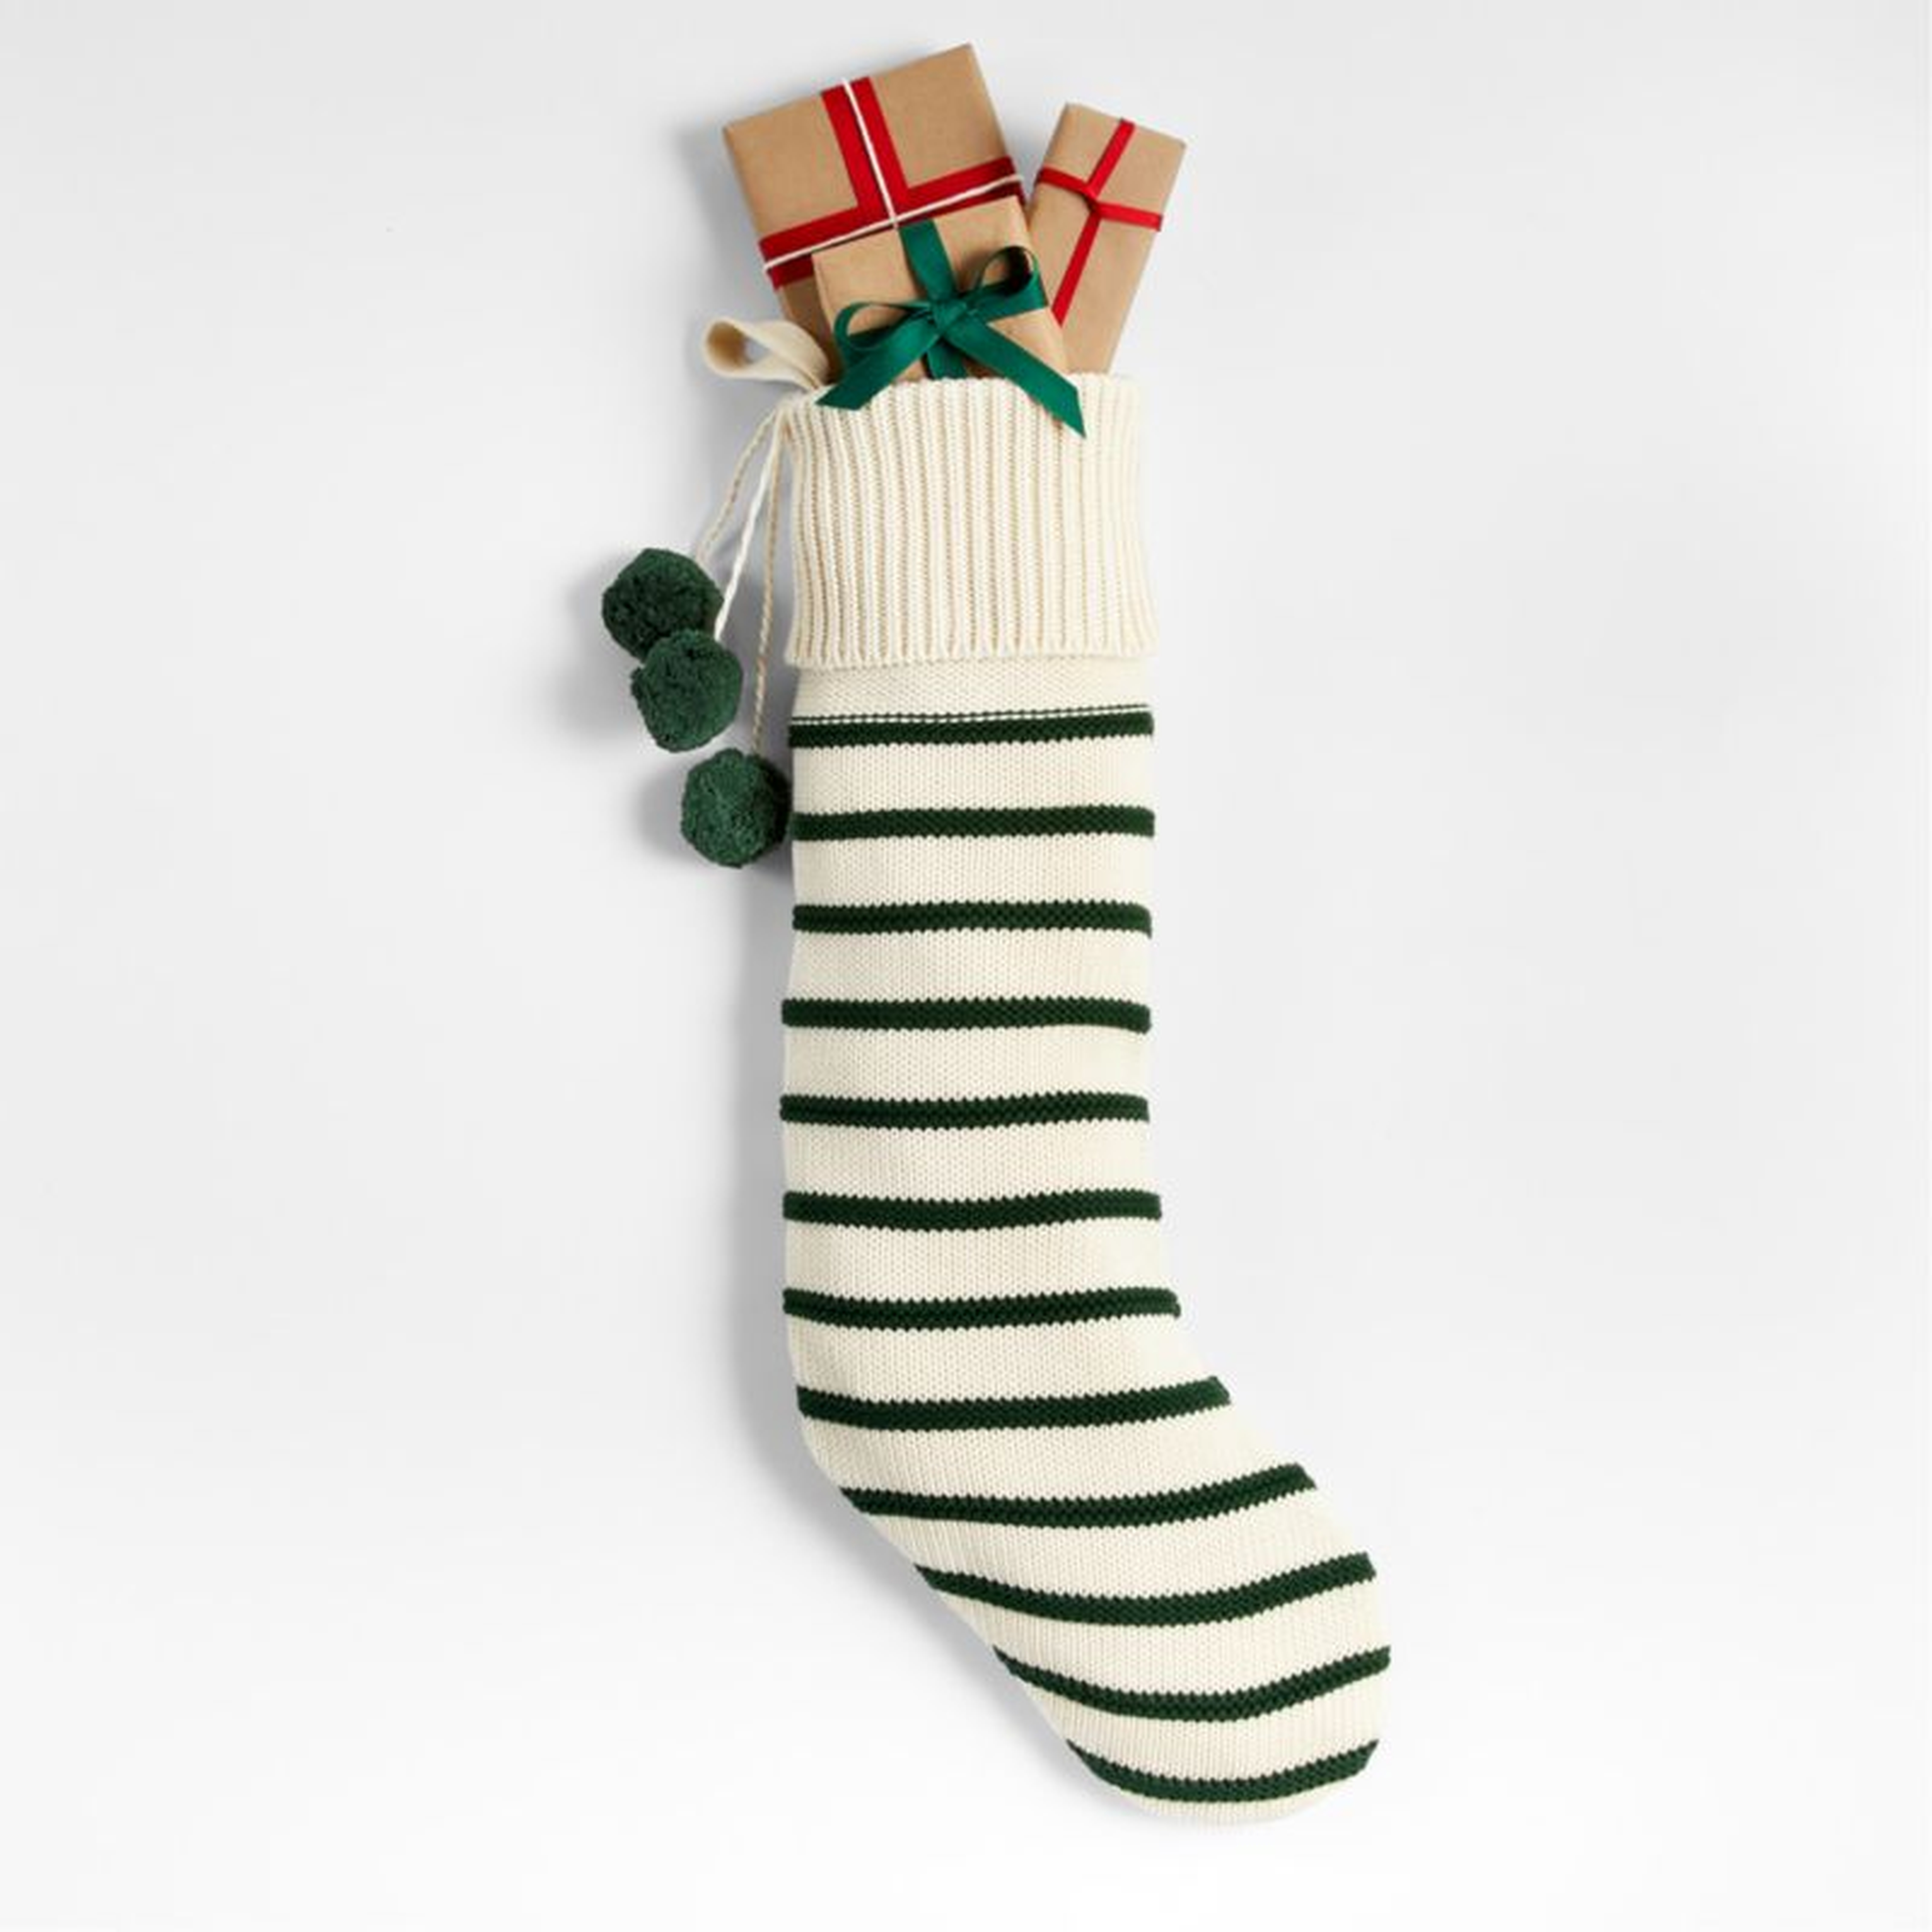 Stripe Knit Christmas Stocking, Green - Crate and Barrel